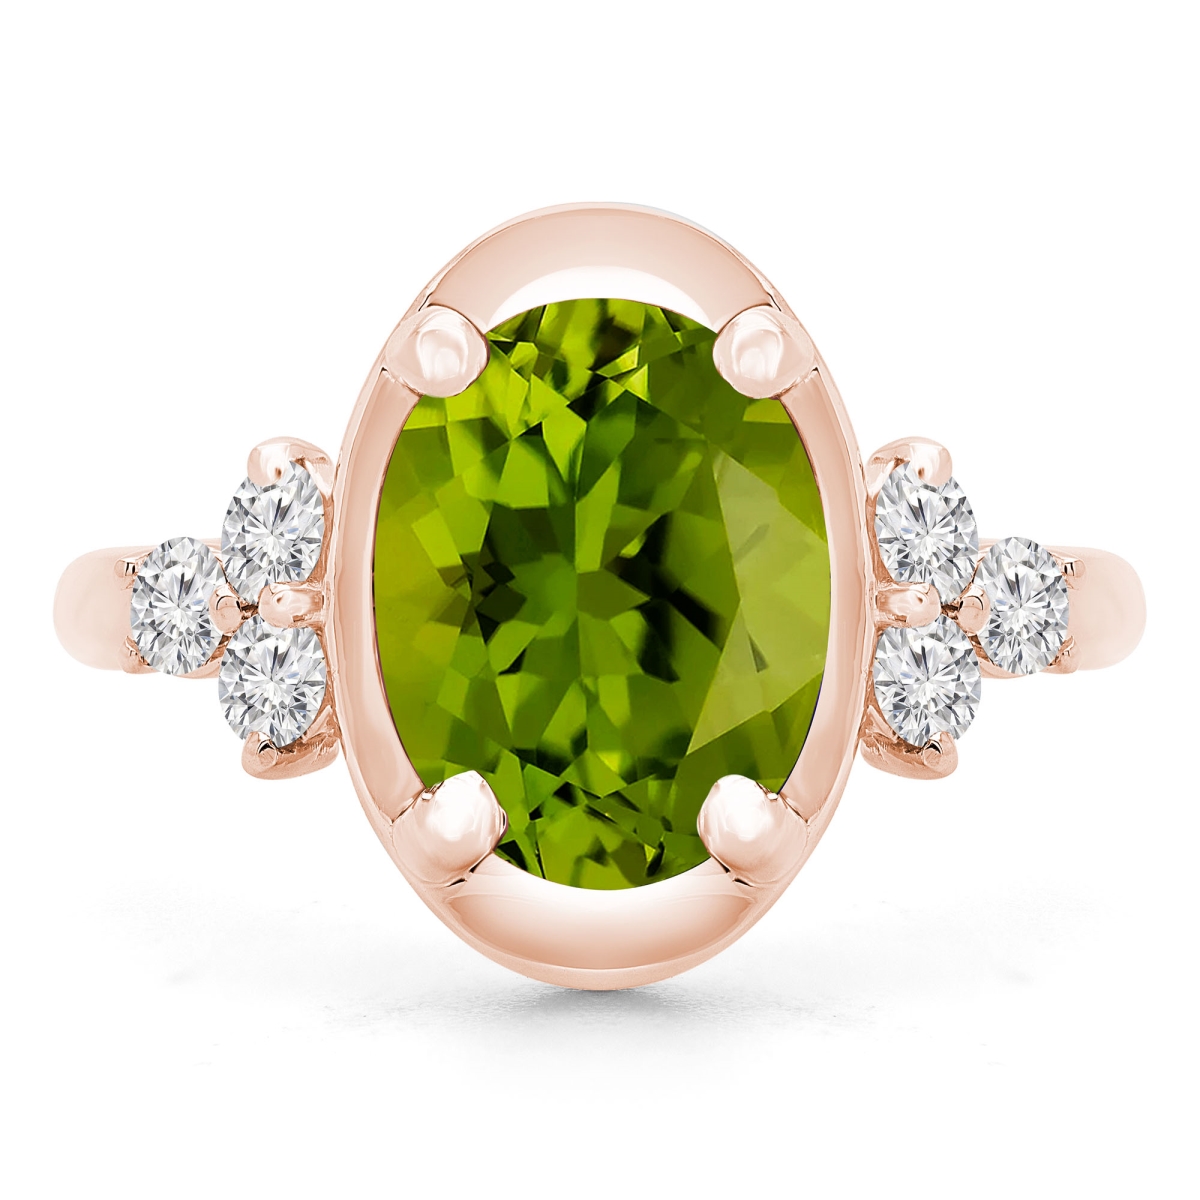 Picture of Majesty Diamonds MD190412-8.75 3.9 CTW Oval Green Peridot Cocktail Ring in 14K Rose Gold - Size 8.75